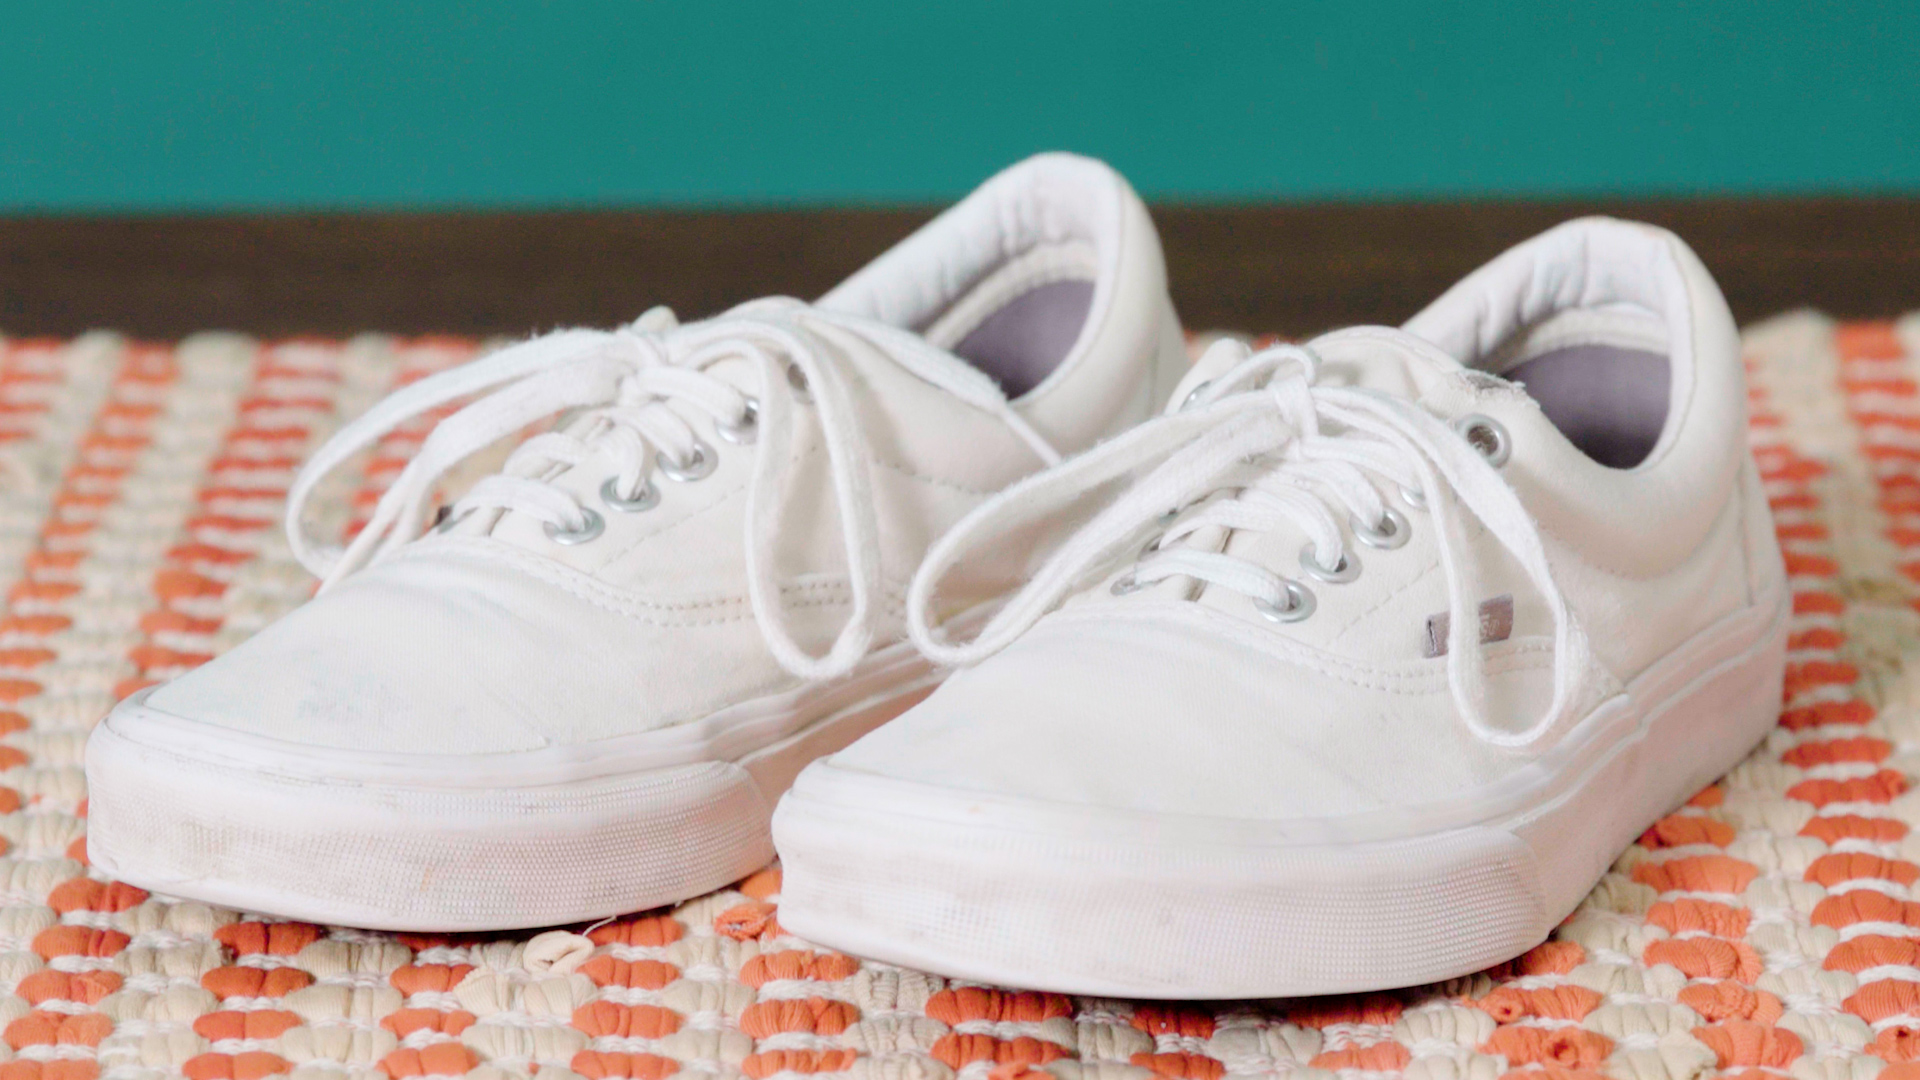 How to Make the Best Shoe Cleaner at Home: Simple and Effective DIY Methods